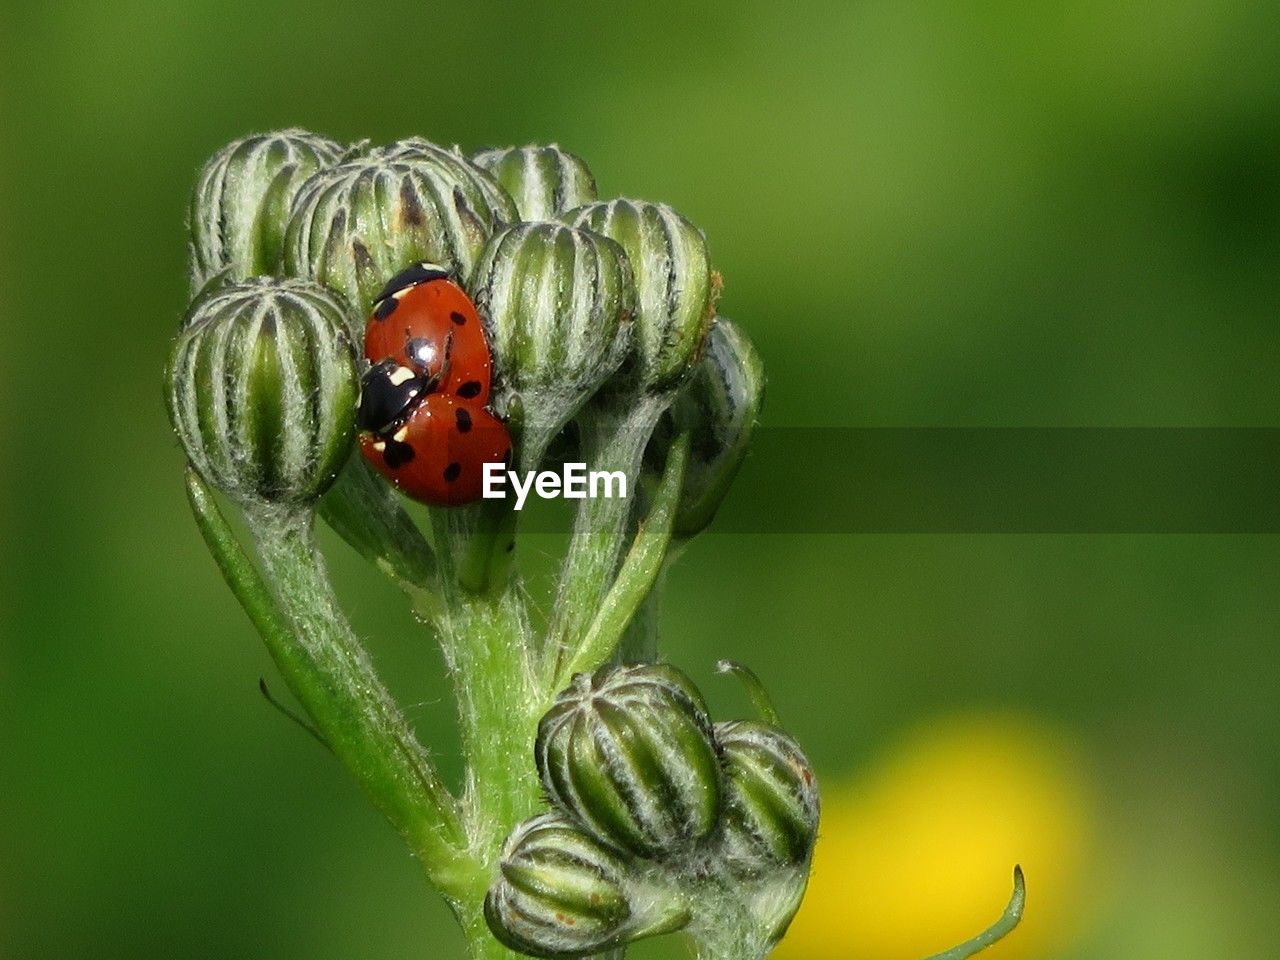 animal, animal themes, insect, ladybug, animal wildlife, beetle, wildlife, green, close-up, macro photography, nature, plant, one animal, no people, focus on foreground, beauty in nature, flower, outdoors, macro, day, spotted, plant part, plant stem, leaf, red